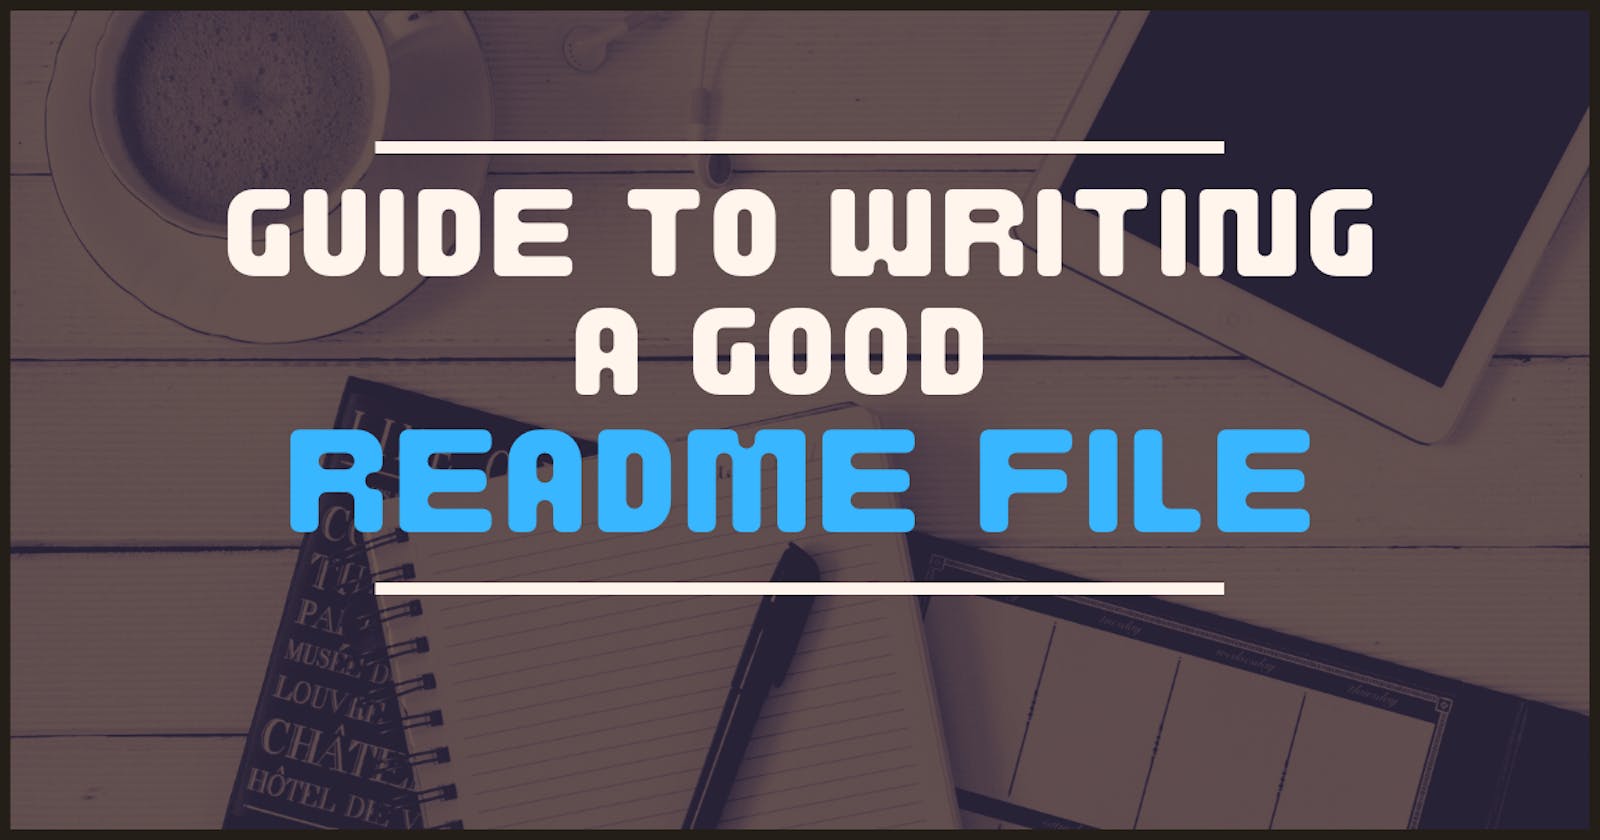 About README  File